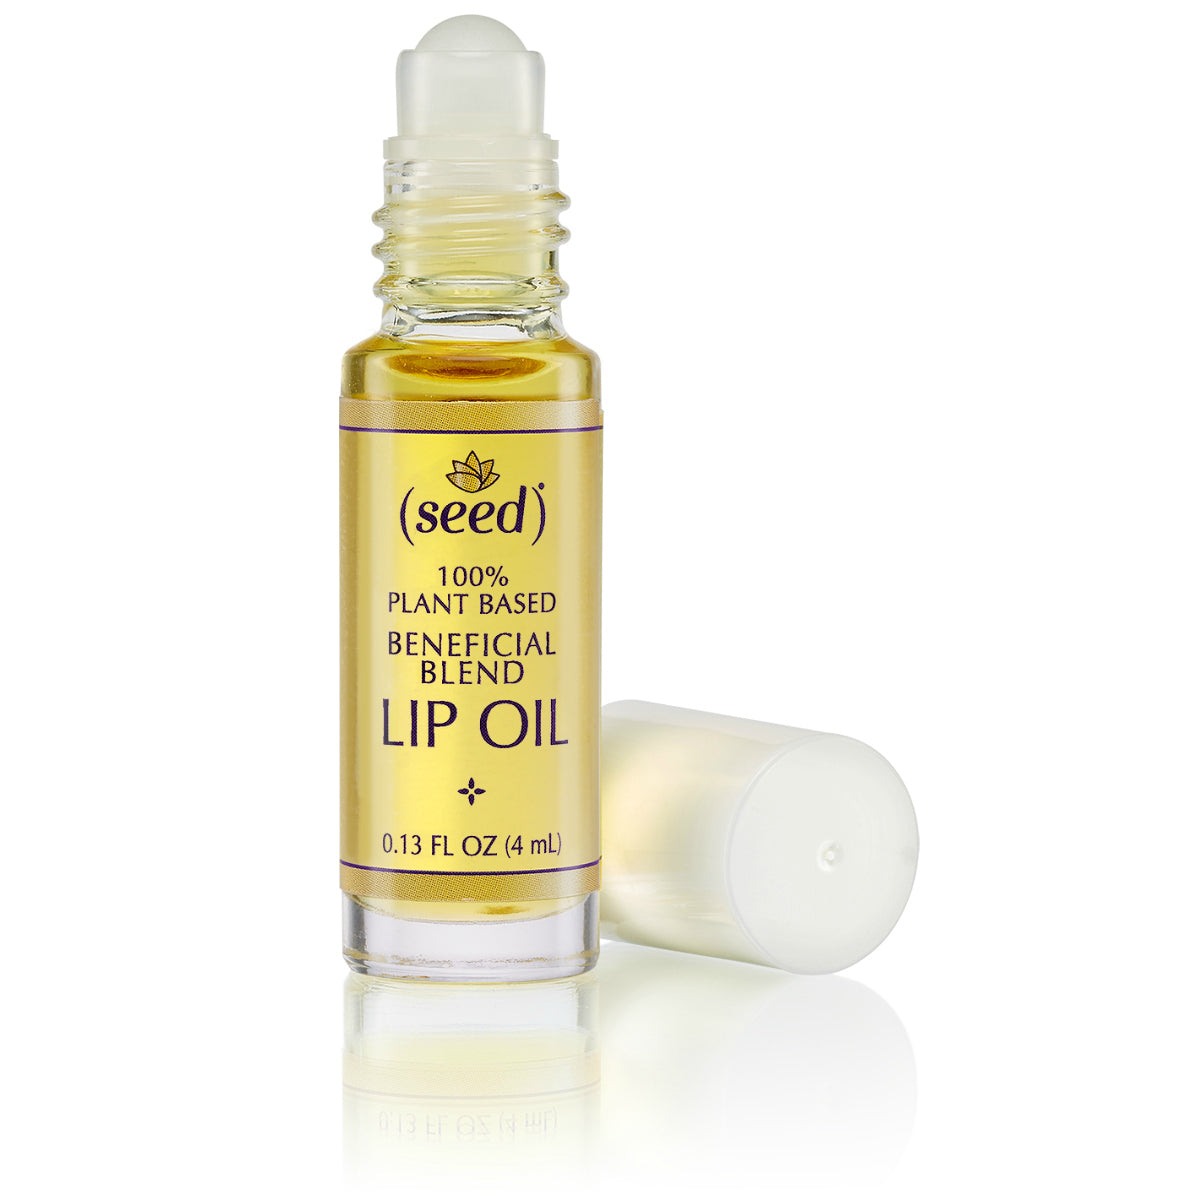 Seed Dream Land Blend Lip Oil features lemon, lavender, and ginger essential oils